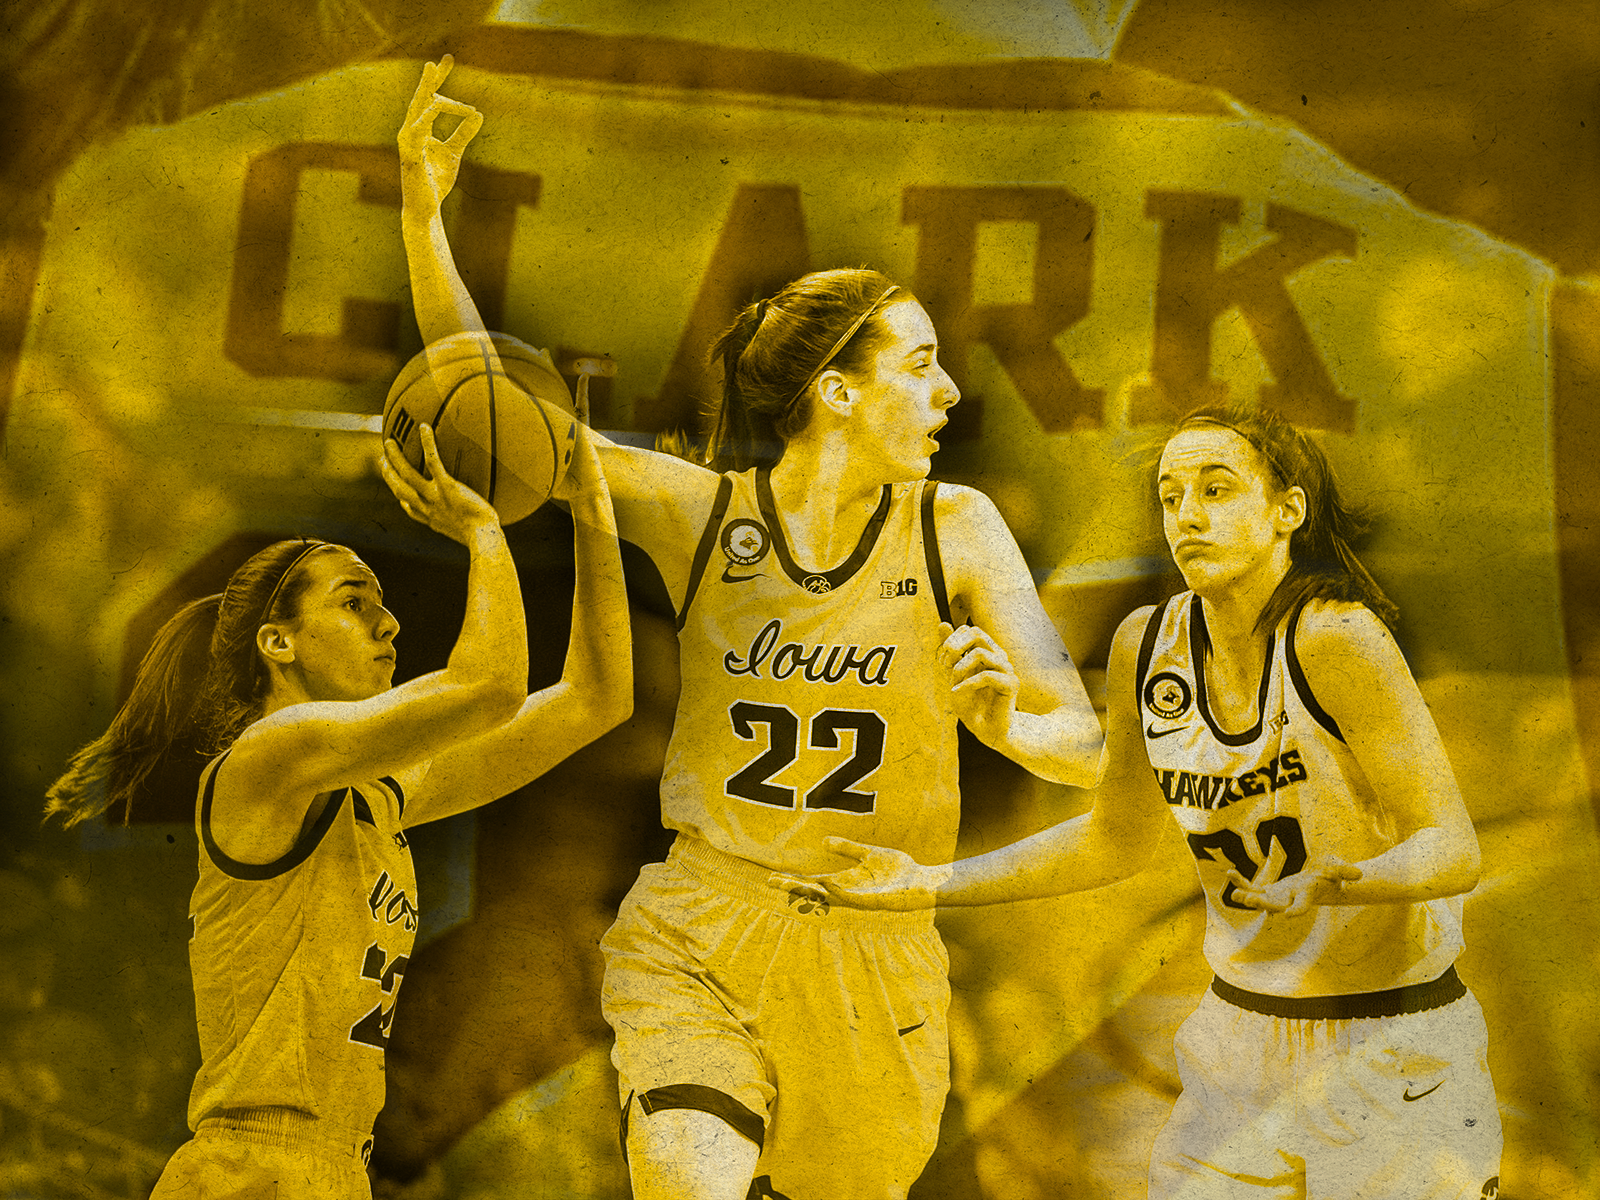 Iowa Womens Basketball  Awards 𝙧𝙤𝙡𝙡𝙞𝙣𝙜 in Caitlin Clark was  named to the Big Ten Honor Roll  httpbitly3AJV3T7  Facebook